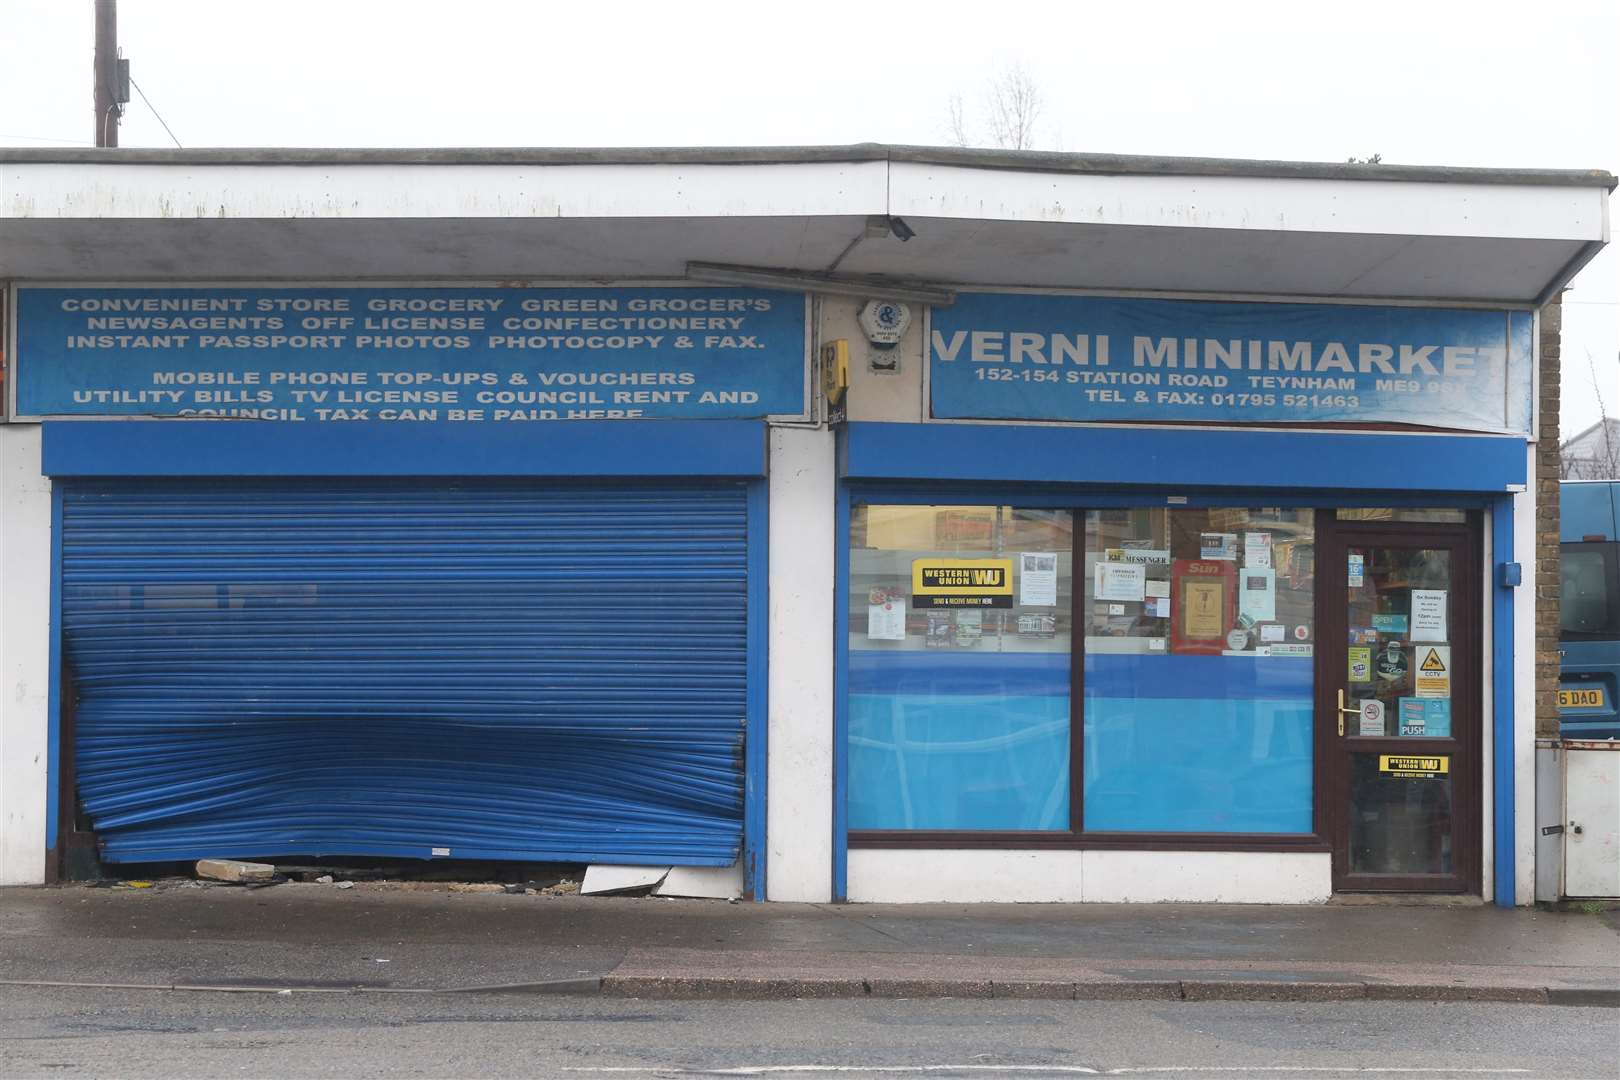 The aftermath of a stolen car going through the front of Verni's Mini Market, in Station Rd, Teynham